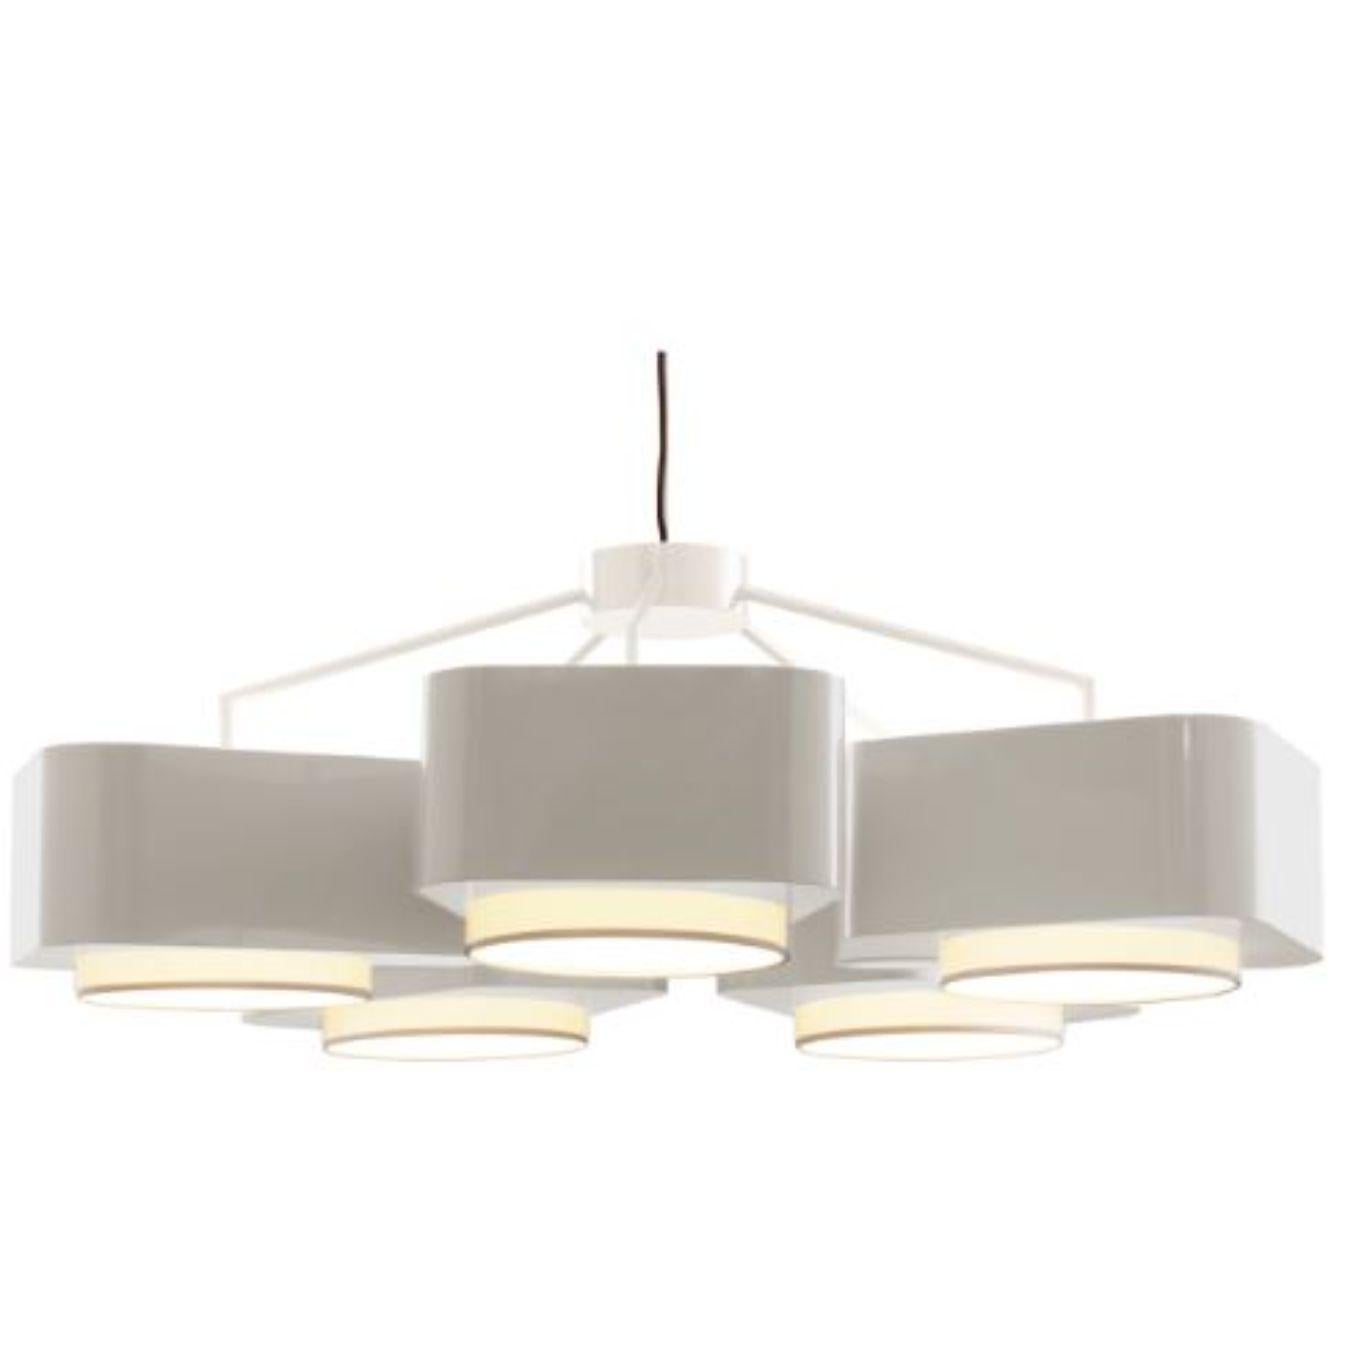 Ivory and taupe carousel suspension lamp by Dooq
Dimensions: W 110 x D 110 x H 40 cm
Materials: lacquered metal.
abat-jour: cotton
Also available in different colors.

Information:
230V/50Hz
E27/5x20W LED
120V/60Hz
E26/5x15W LED
bulbs not